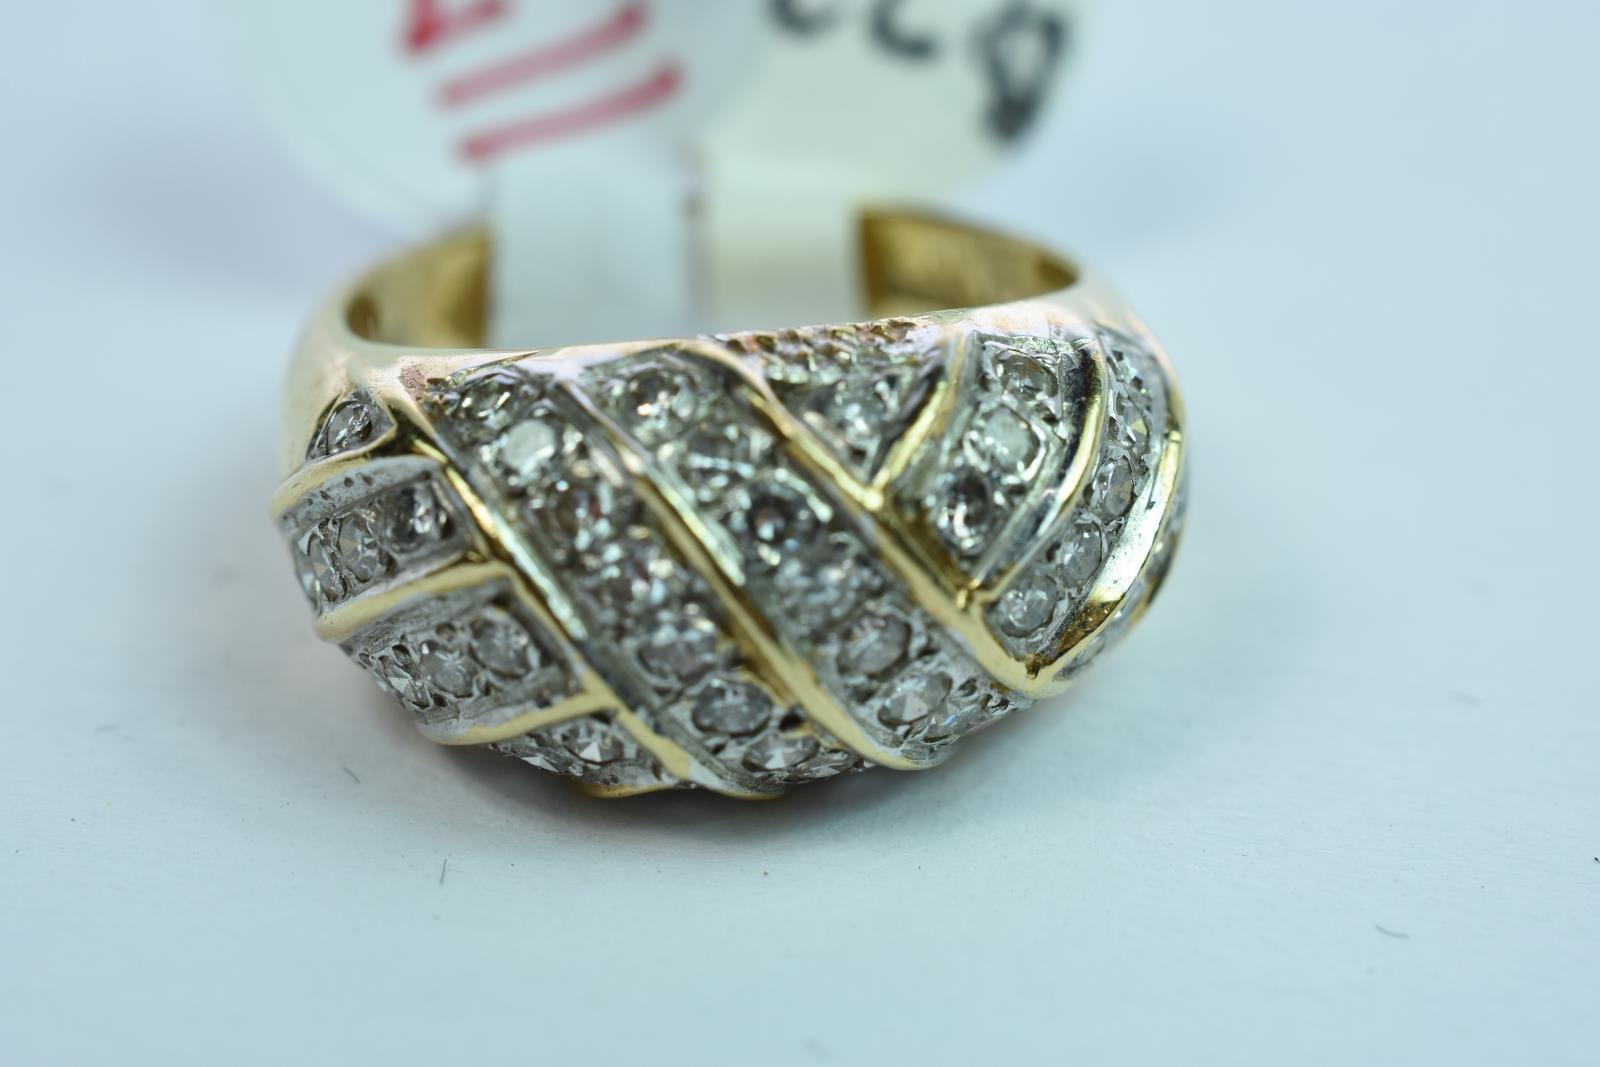 14KT GOLD & DIAMOND RING 5.8 GTW, $2200.00 RETAIL VALUE , SIZE 6 1/4